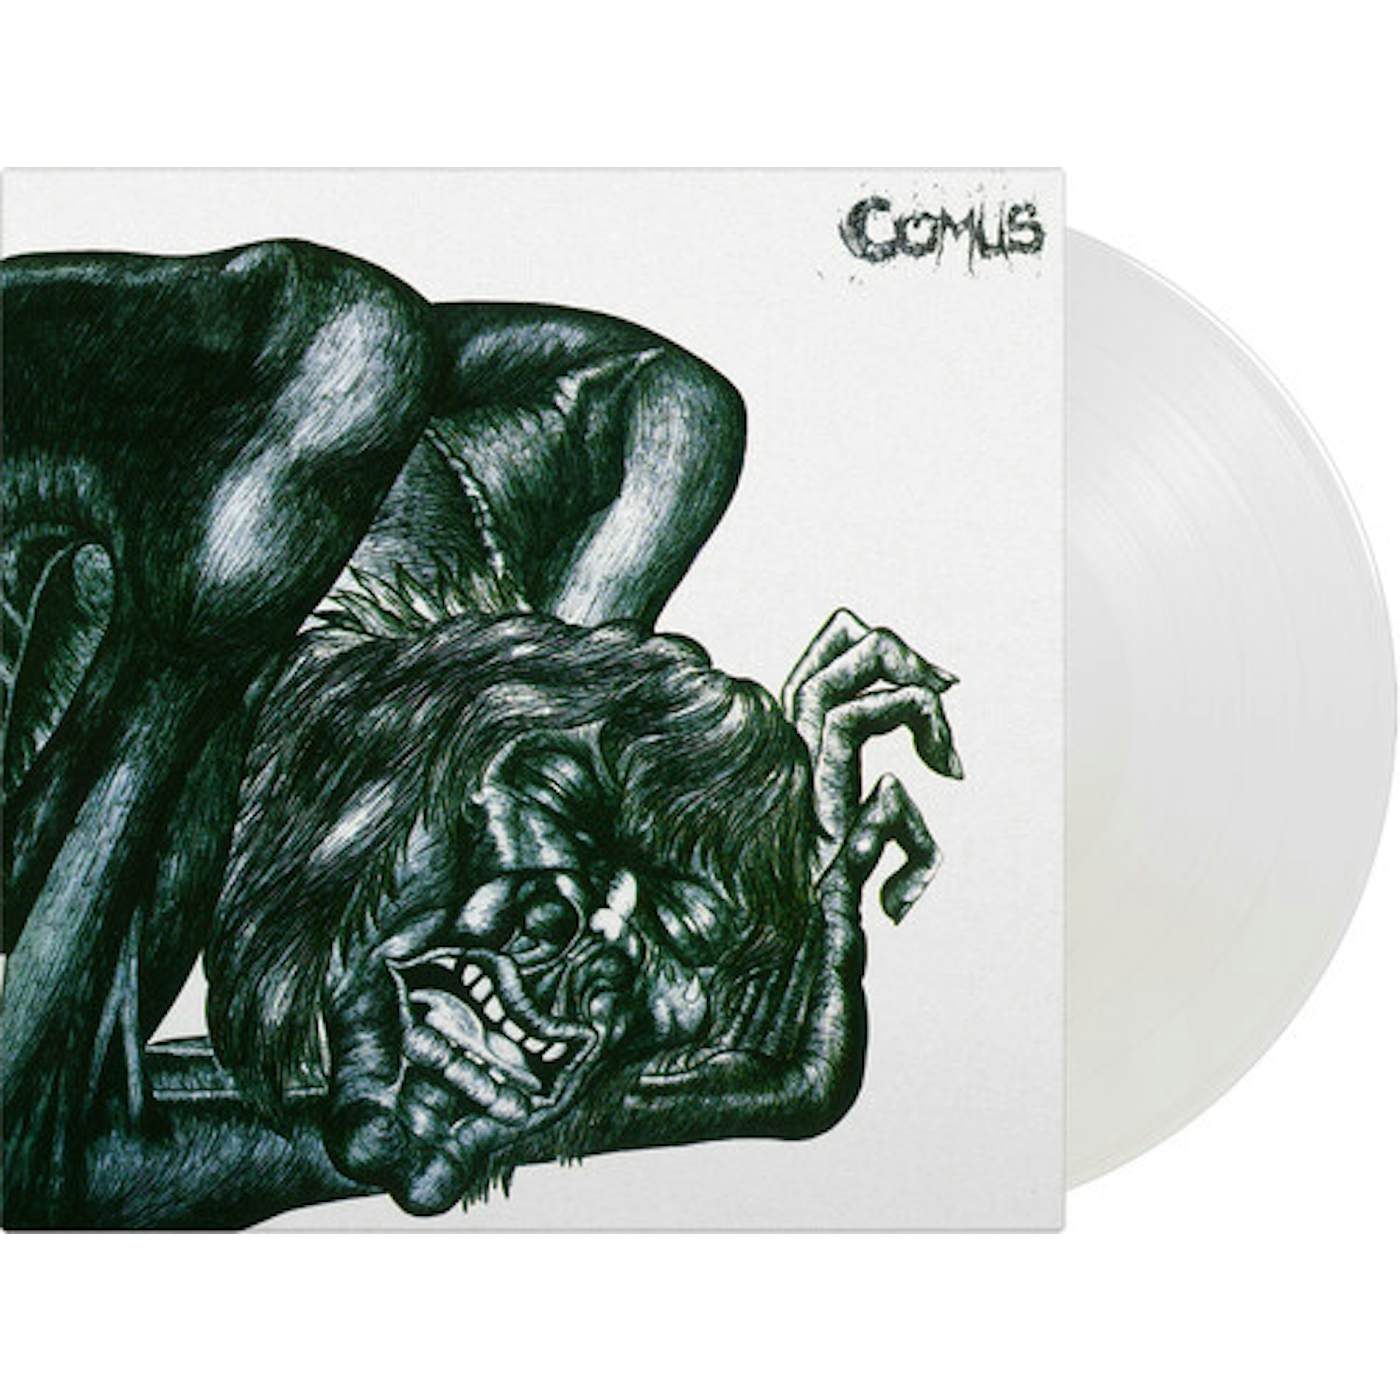 Comus First Utterance (Limited Edition/180 Gram/Crystal Clear) Vinyl Record